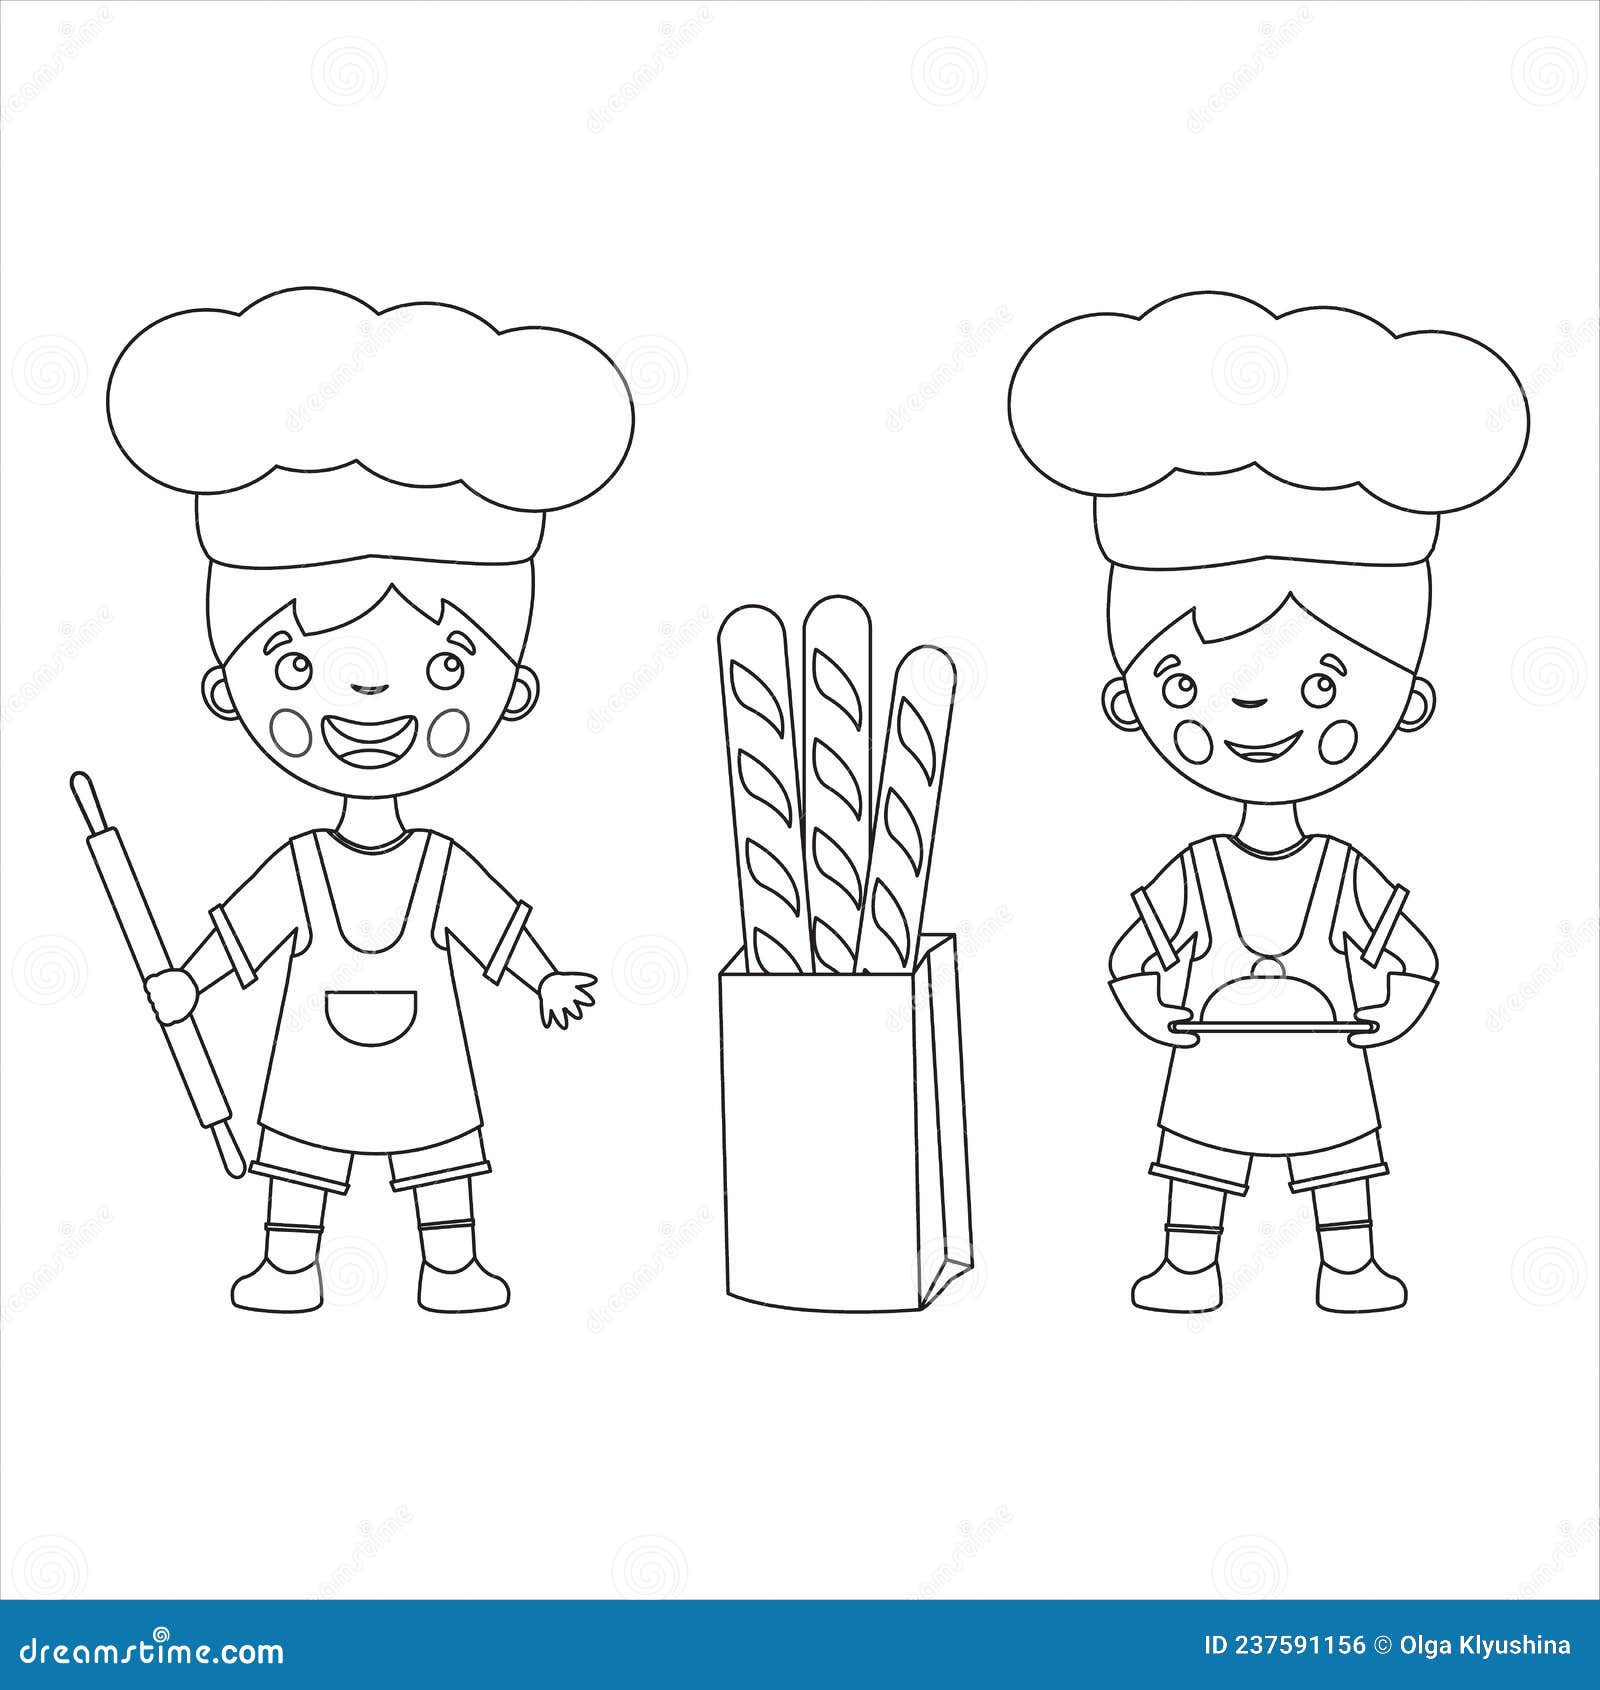 Coloring page cartoonish twist with dish rolling pin and baguette little cooks in an apron and a chefs hat stock vector